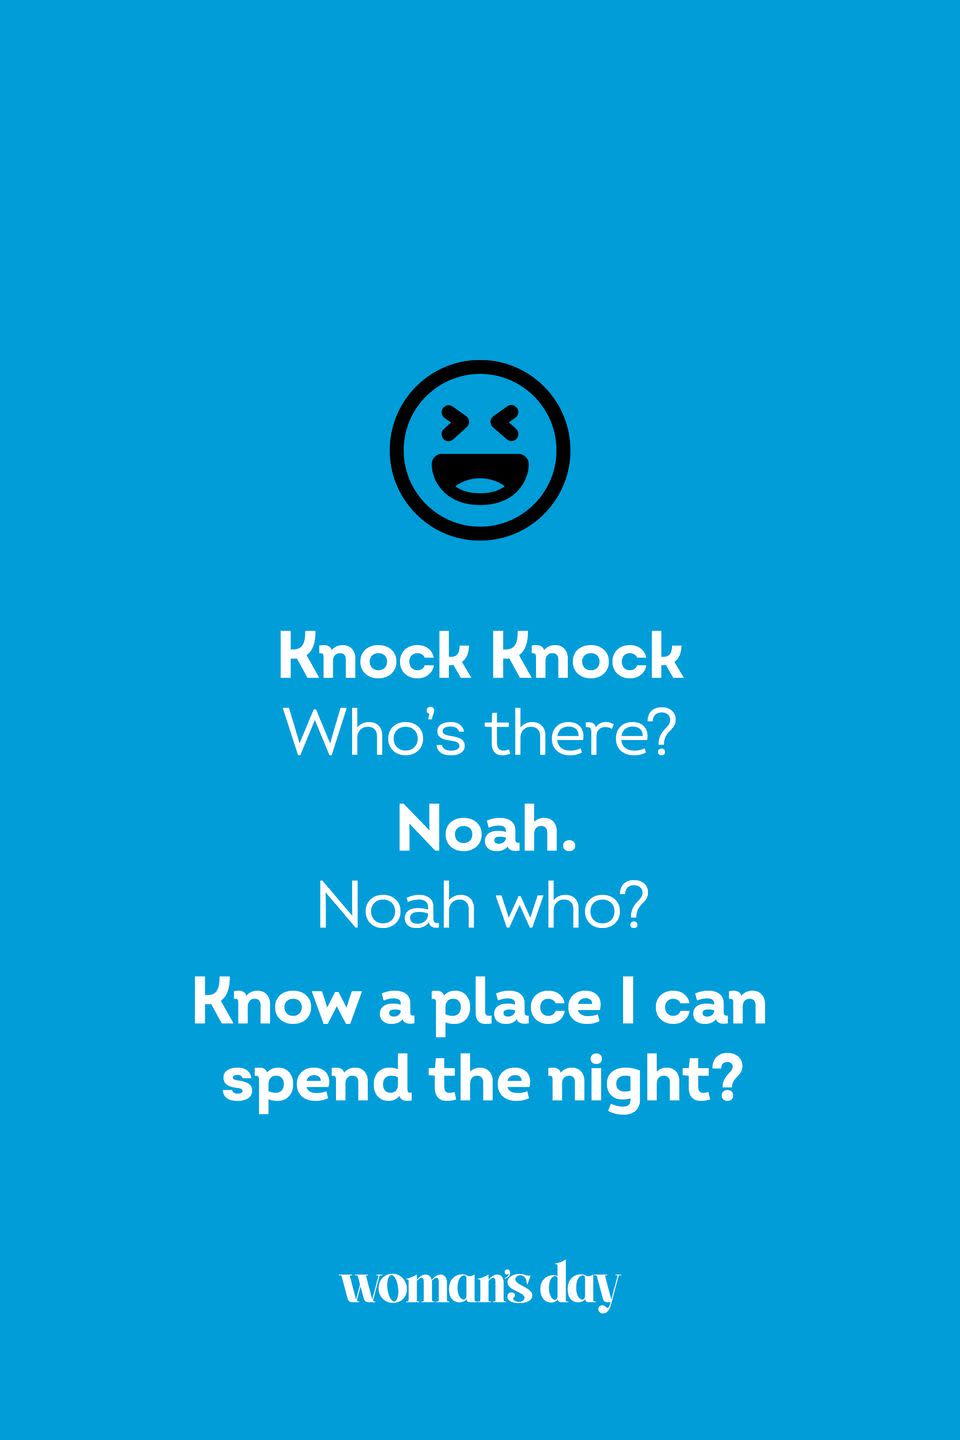 <p><strong>Knock knock.</strong></p><p><em>Who's there?</em></p><p><strong>Noah.</strong></p><p><em>Noah who?</em></p><p><strong>Know a place I can spend the night?</strong></p>